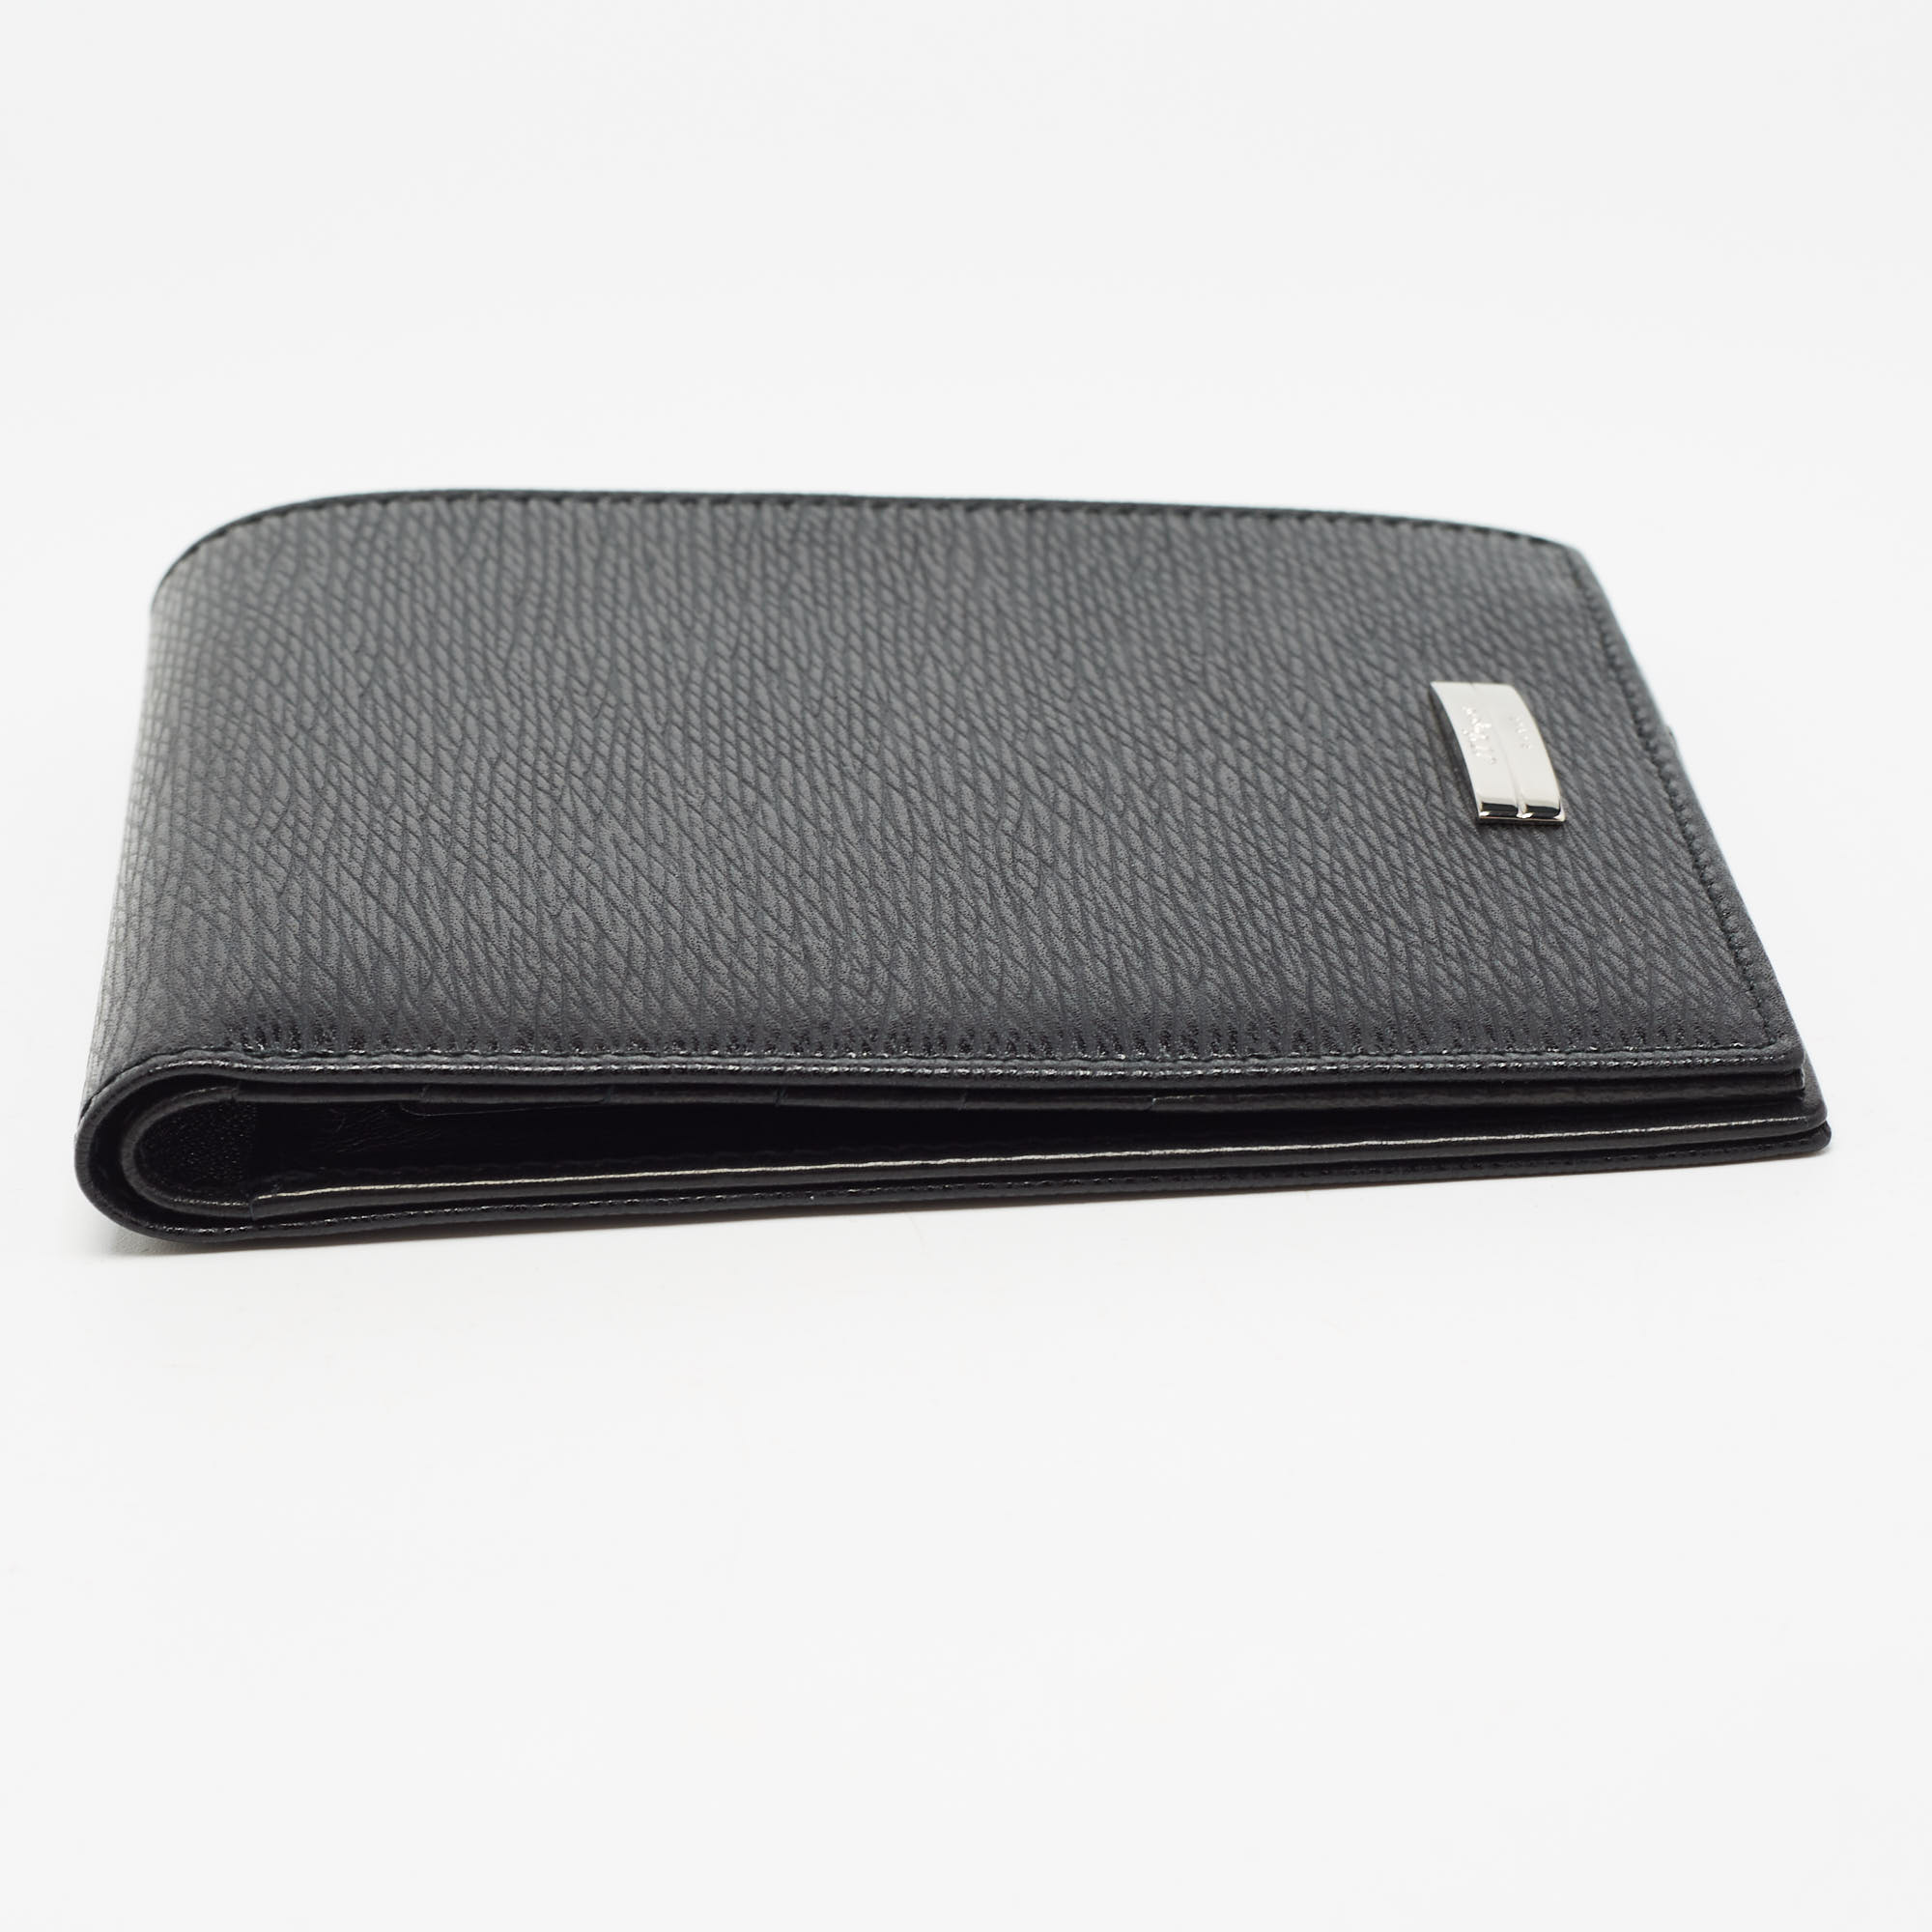 S.T. Dupont Black Textured Leather Bifold Wallet